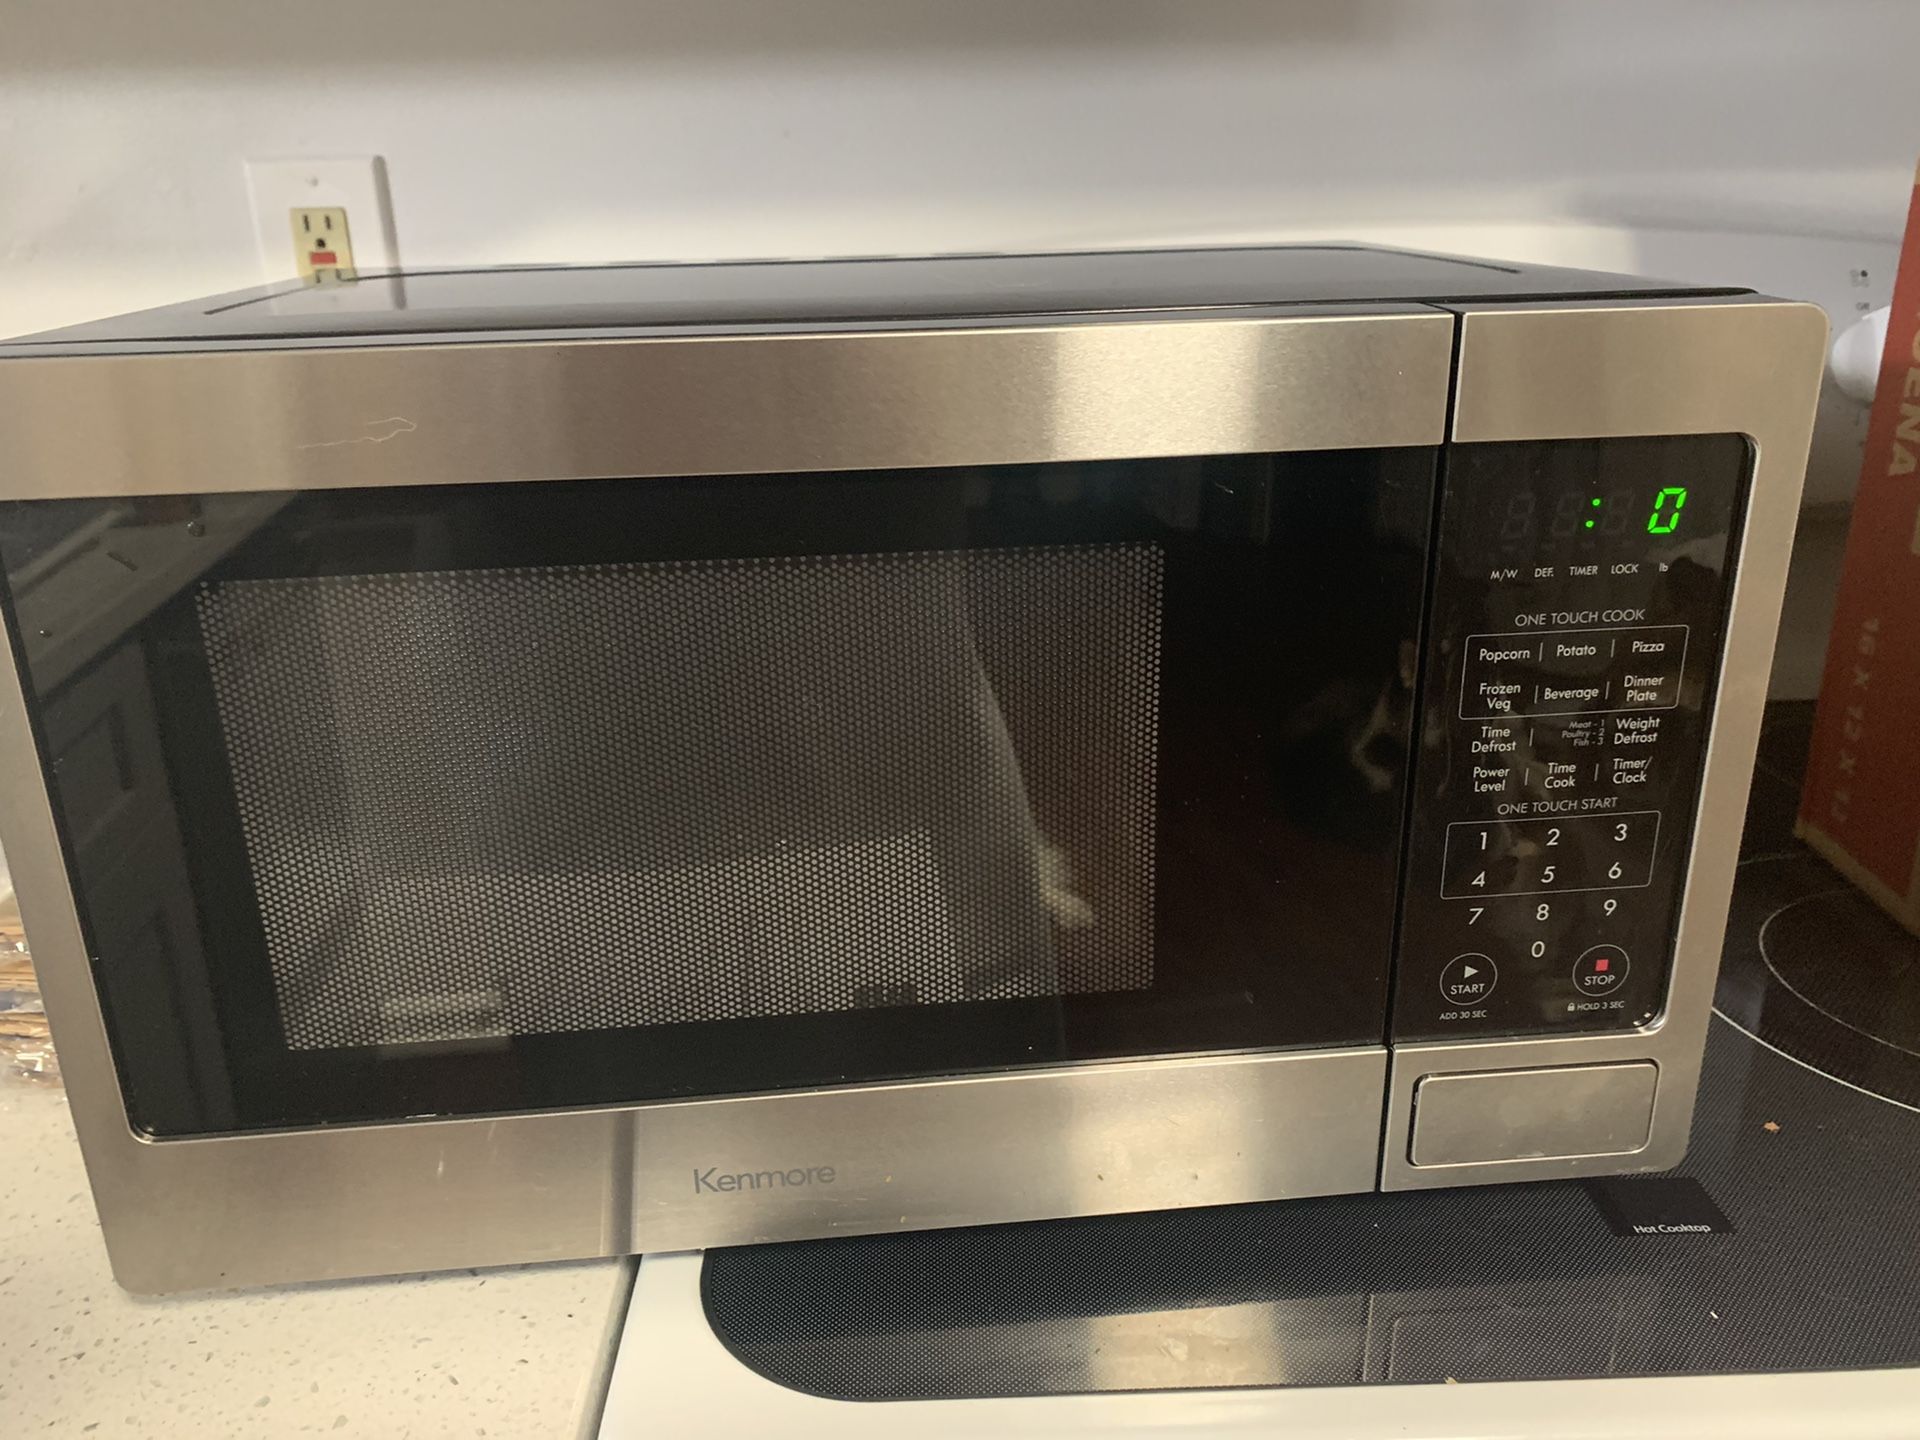 Microwave oven (Kenmore)